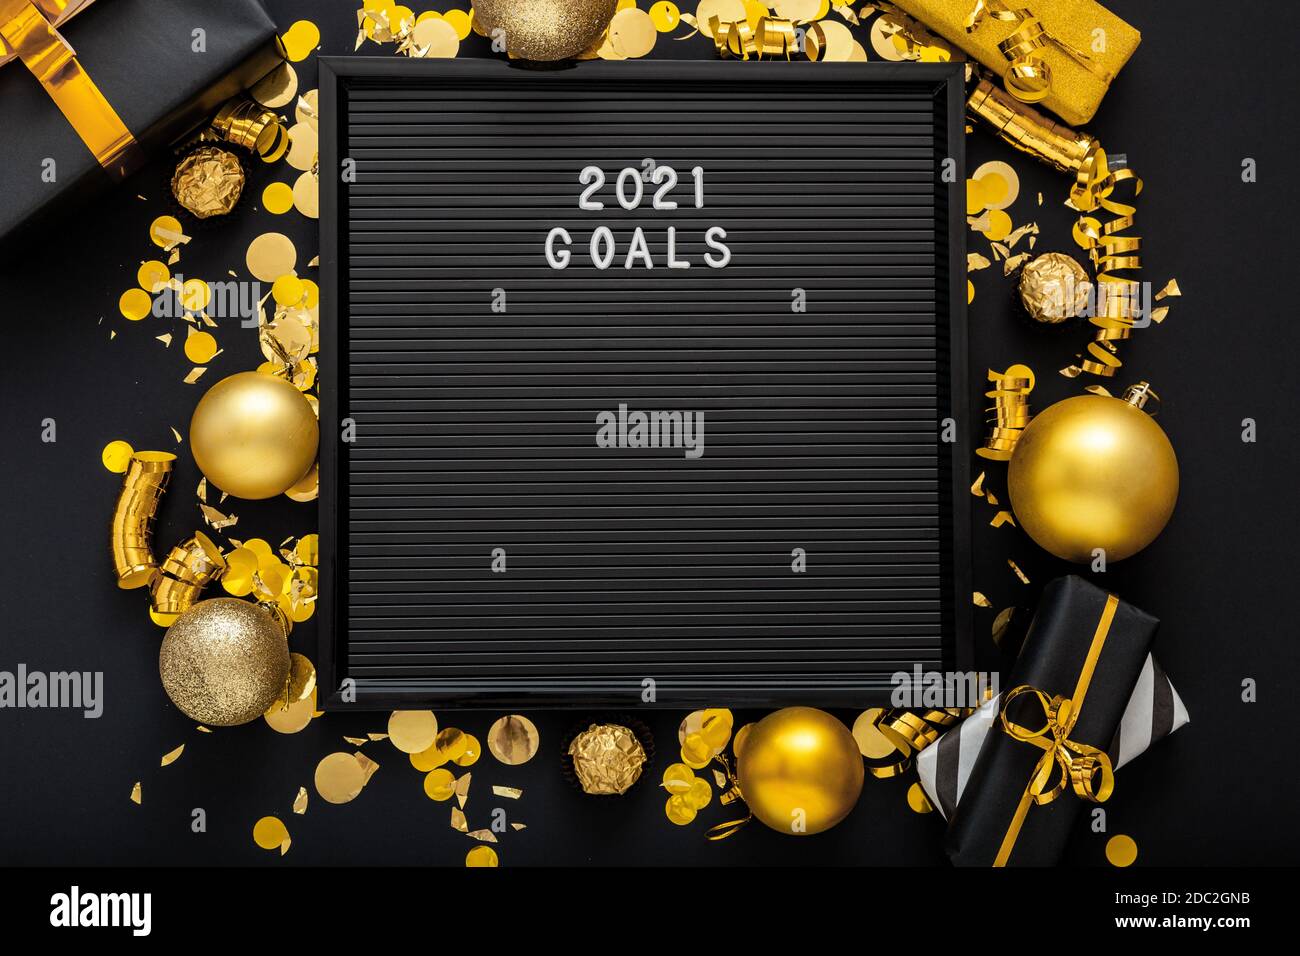 2021 Goals text on black Letter Board with gold Christmas festive decor, confetti balls. New year 2021 goals, resolution, check list with motivation Stock Photo